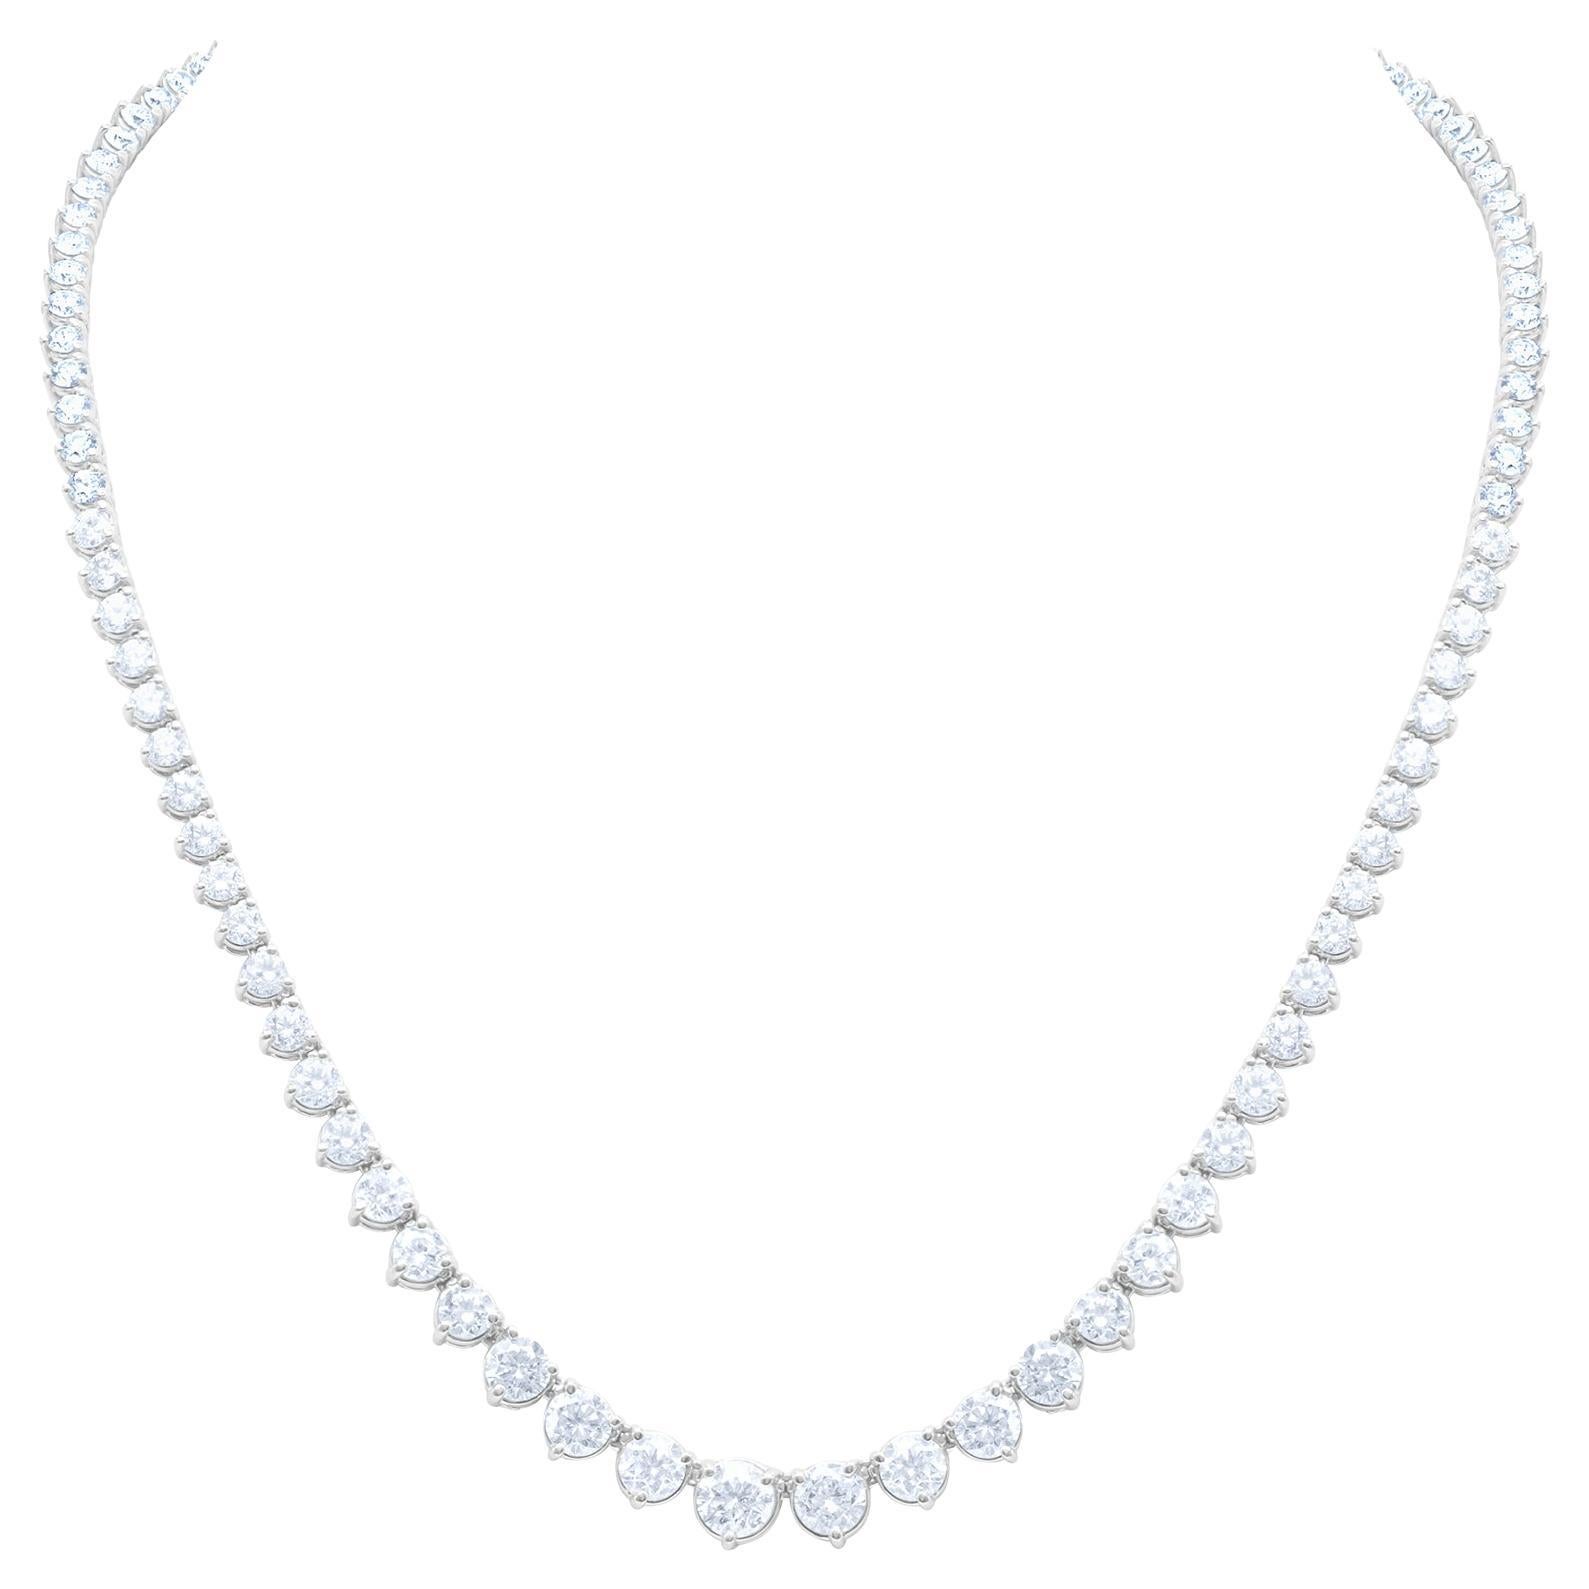 Diana M.23.10 cts 3 Prong 18k White Gold Graduated  Riviera Tennis Necklace 